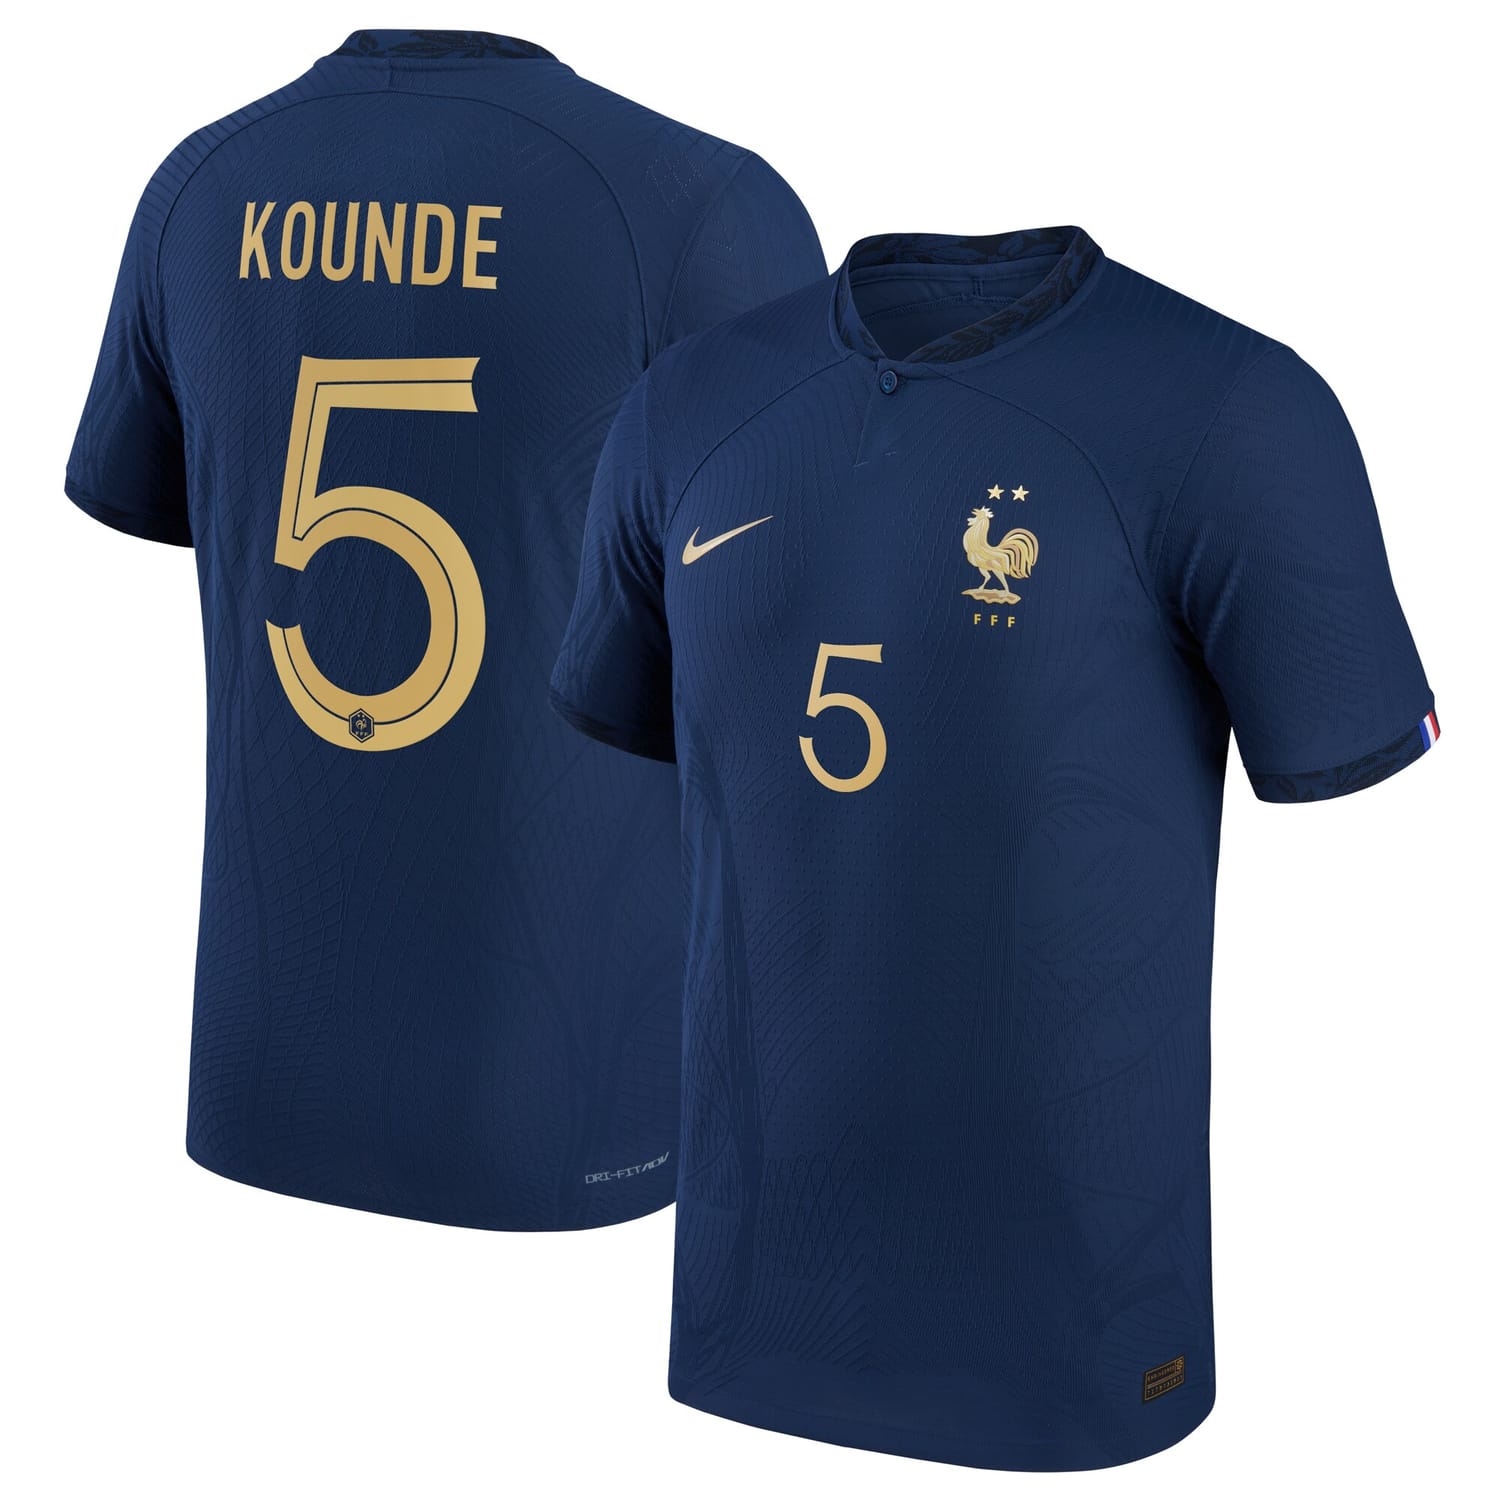 France National Team Home Authentic Jersey Shirt 2022 player Jules Kounde 5 printing for Men